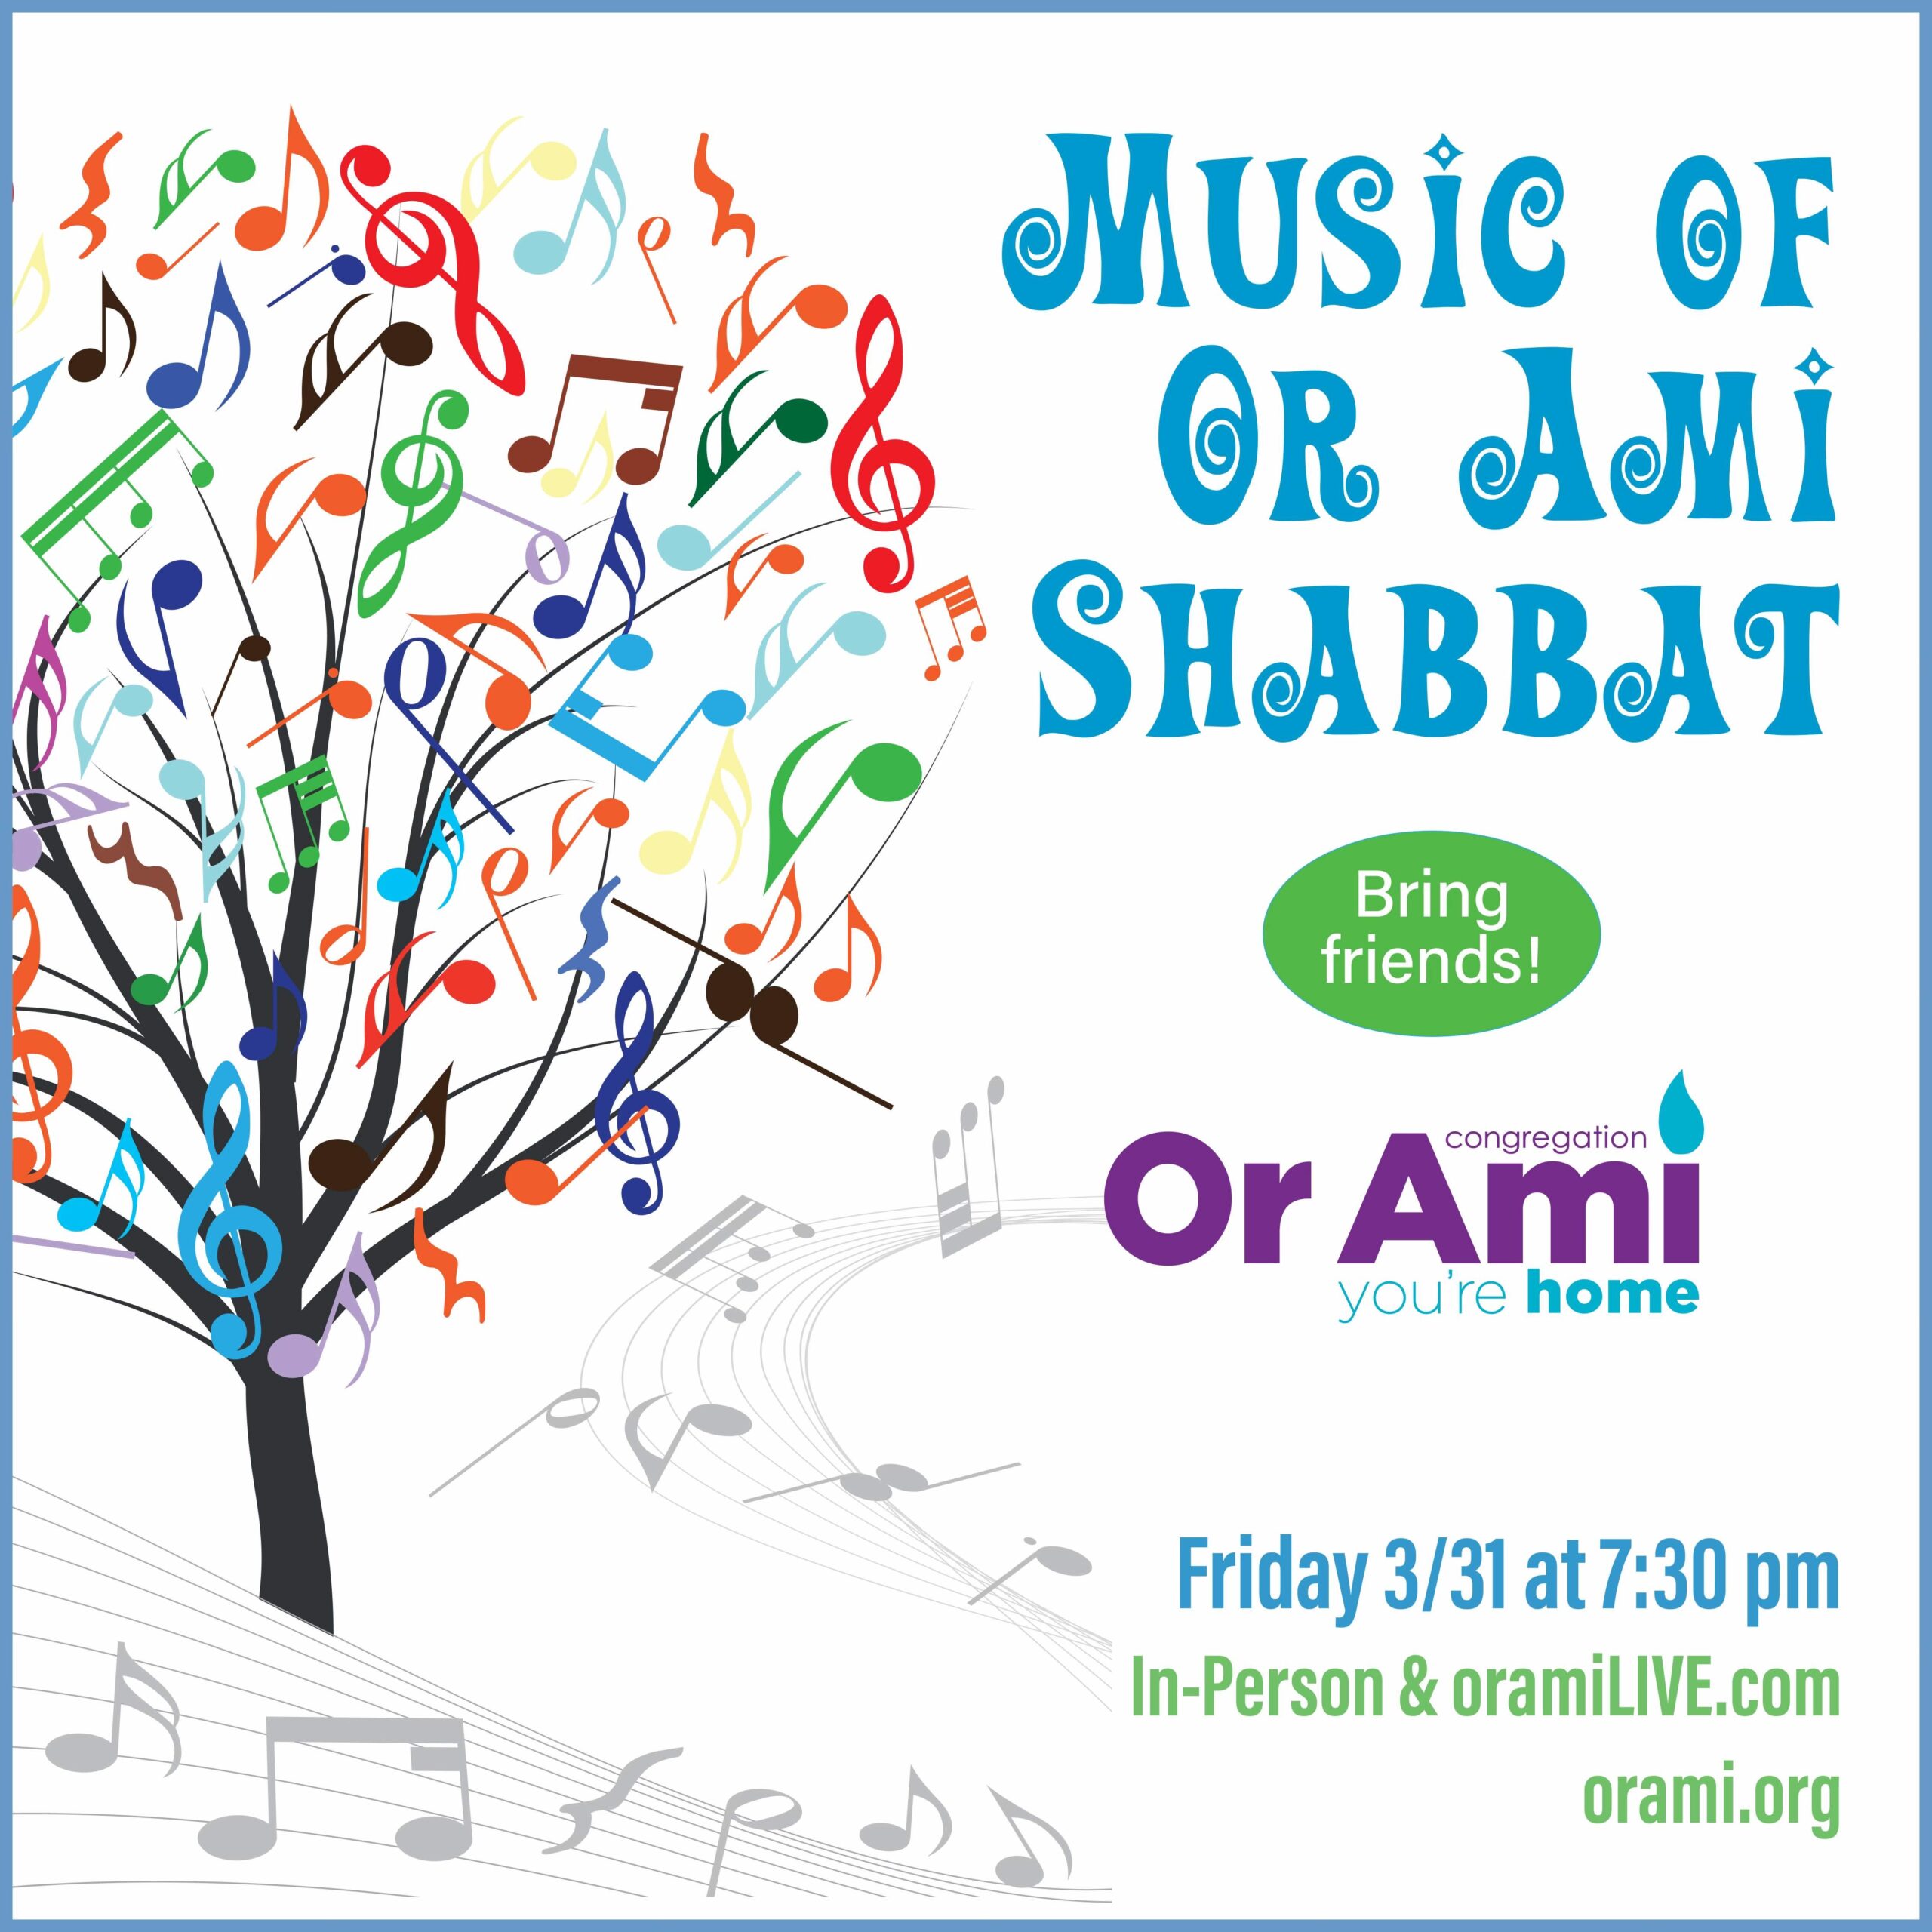 *Or Ami The Music of Or Ami Shabbat